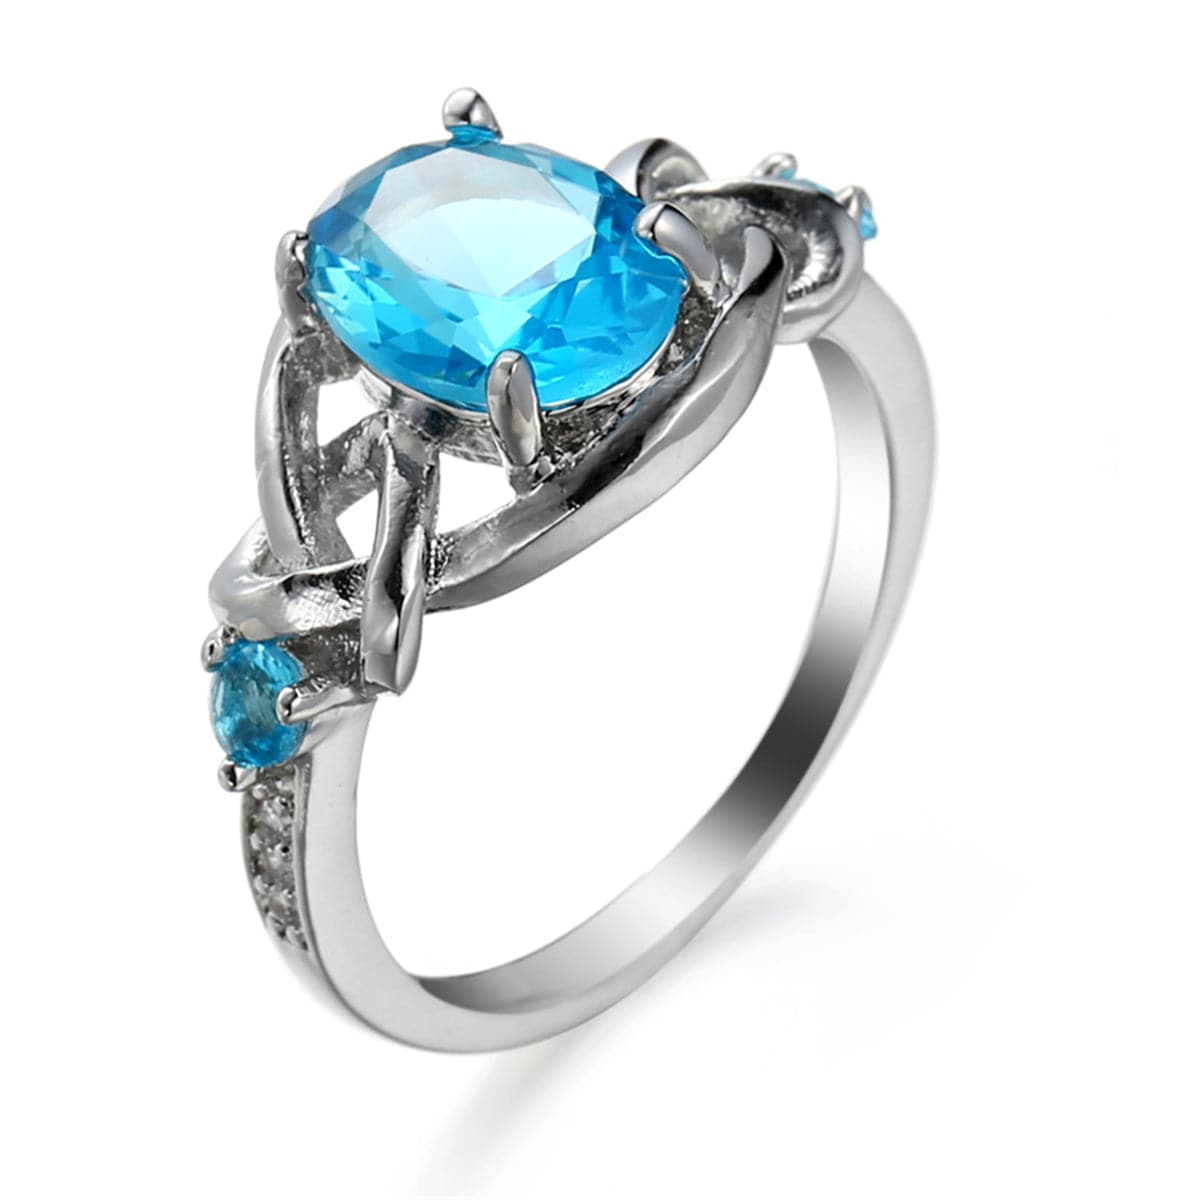 Sea Blue Crystal & Silver-Plated Botany Ring